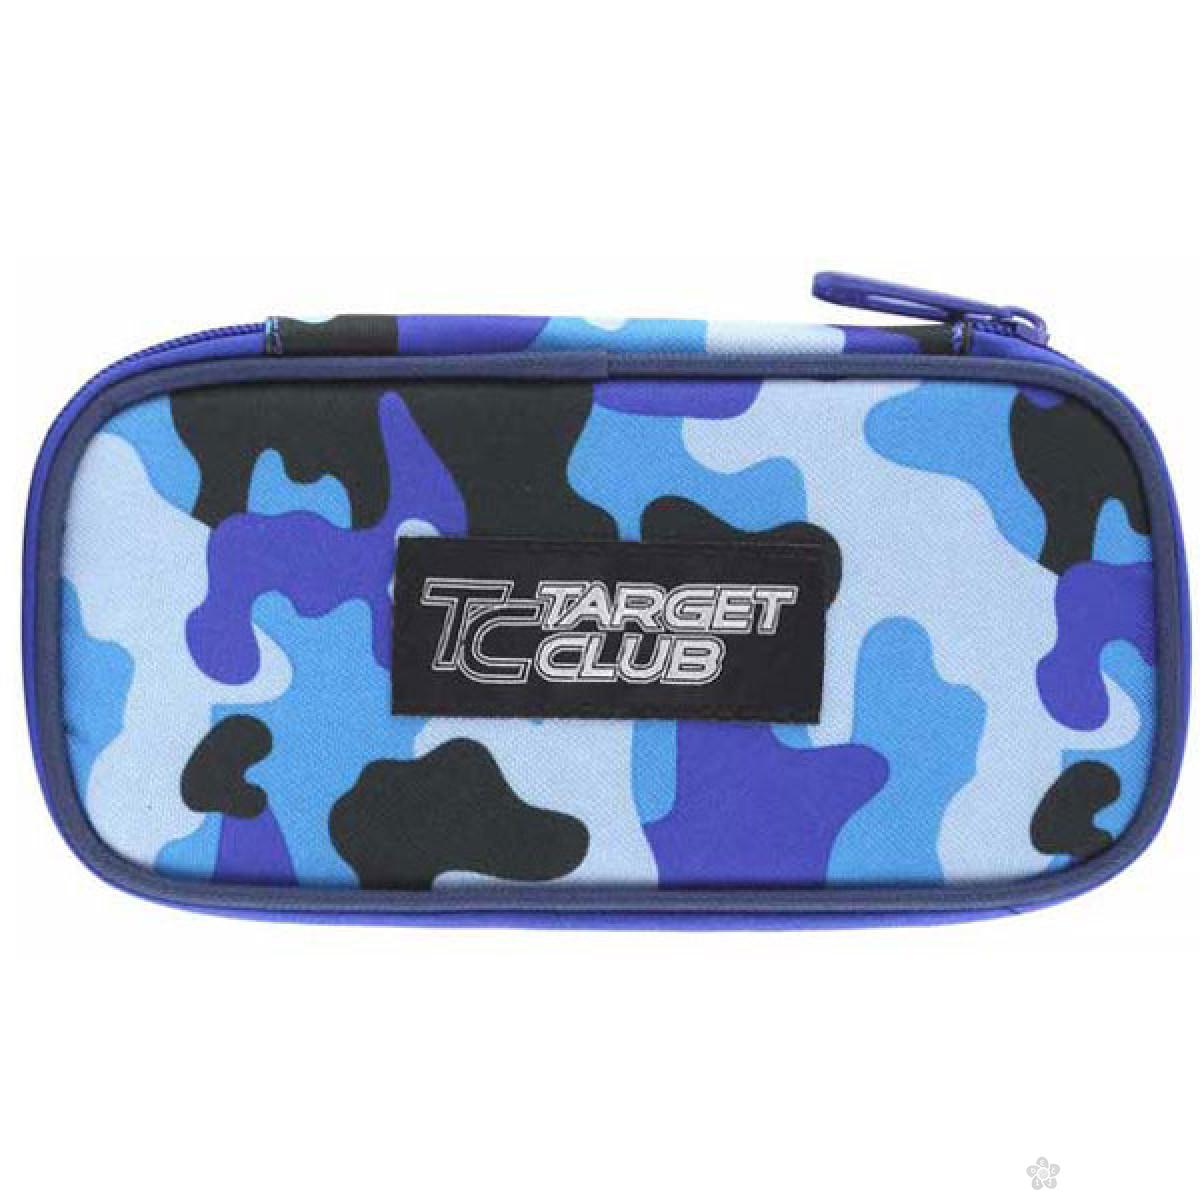 Target Club Pernica Compact Camuflage Blue 17262 